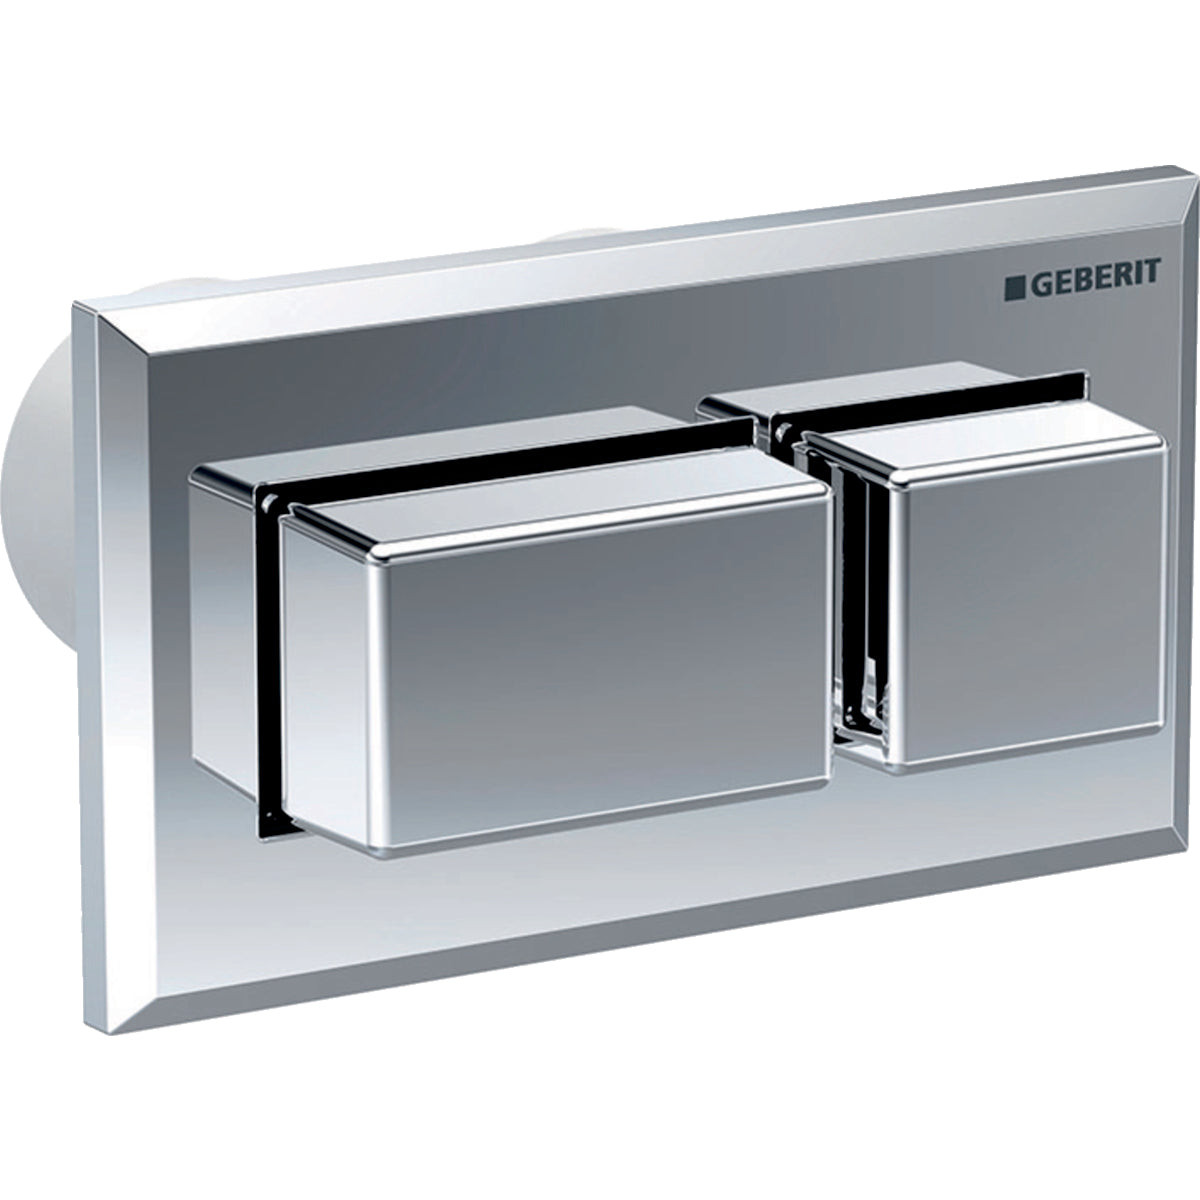 Geberit 116.052.21.1- Geberit remote flush actuation, square design, pneumatic, for dual flush, concealed actuator, protruding: bright chrome-plated - FaucetExpress.ca